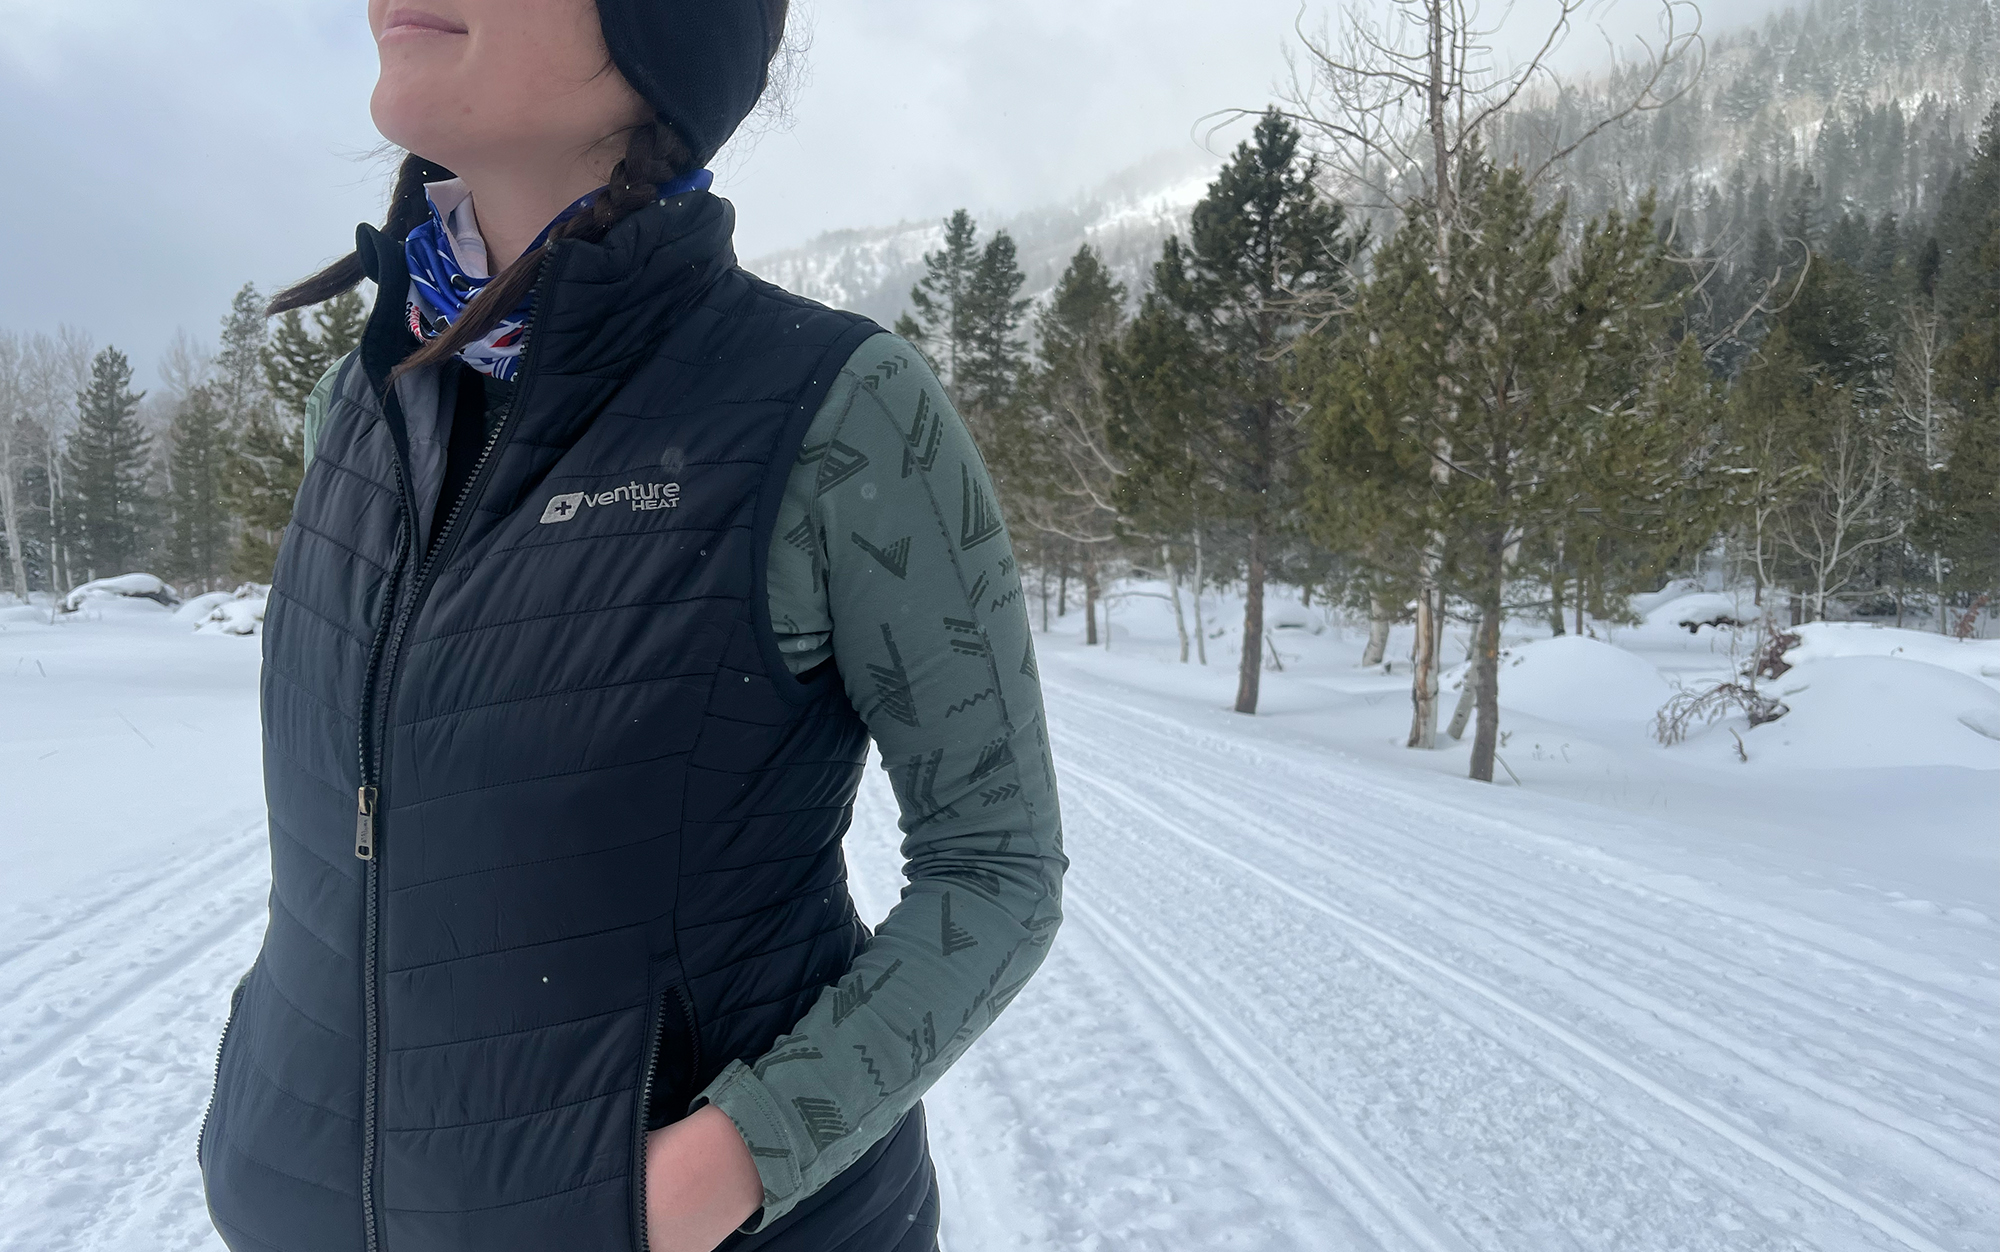 Venture's heated vest fits well and heats up fast.